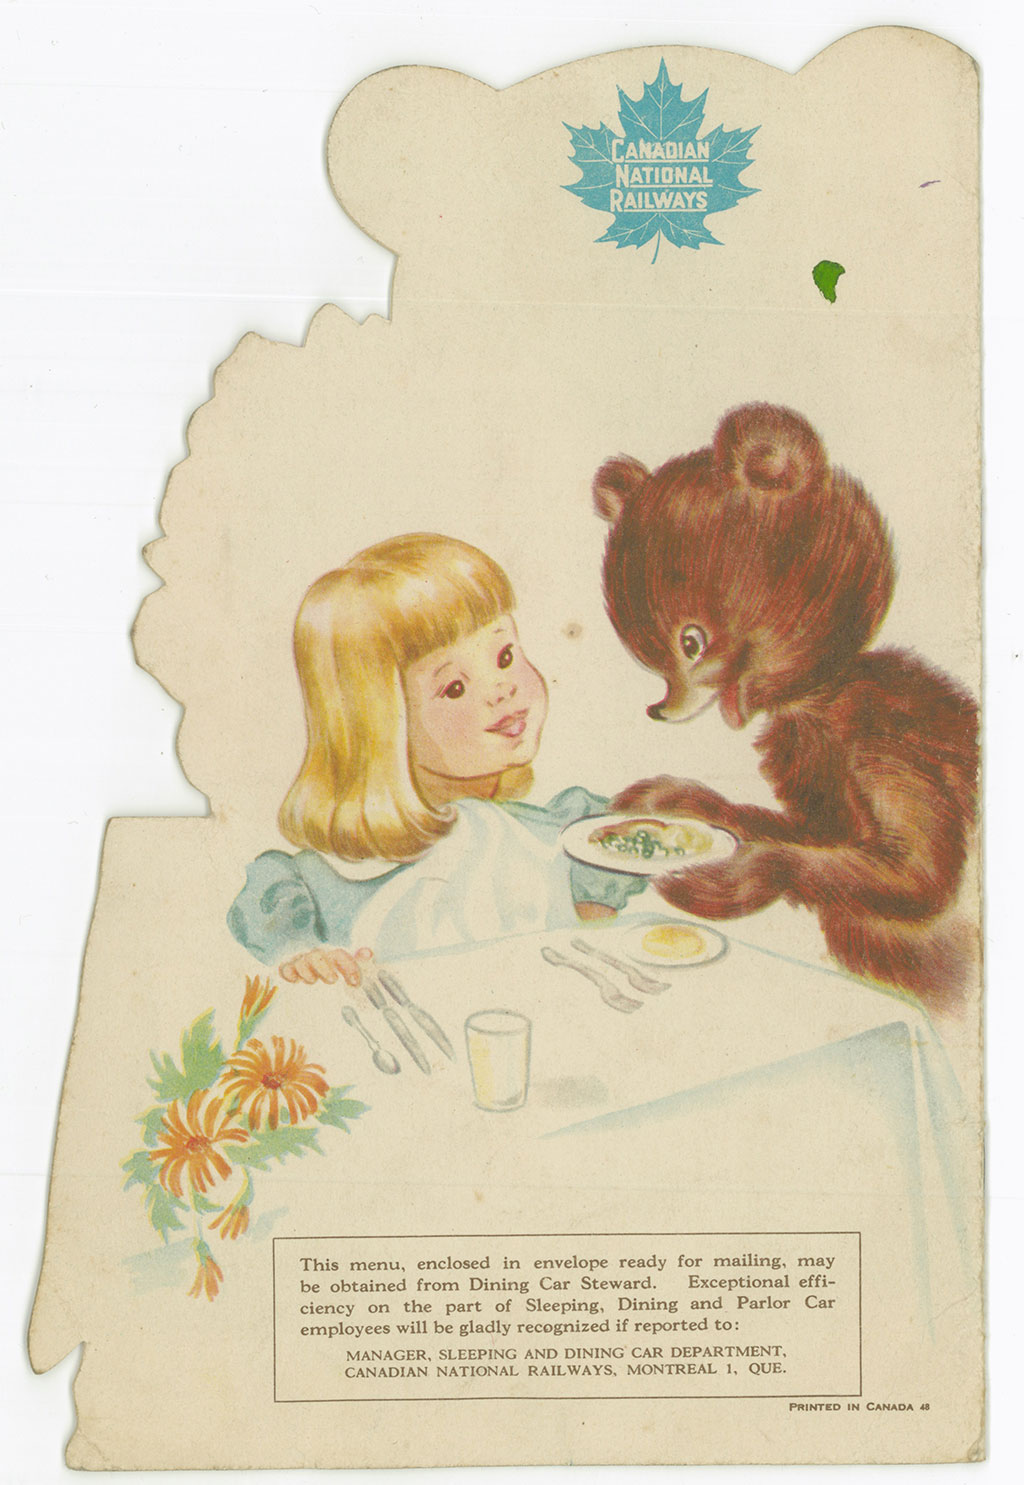 Back cover of an old-fashioned train’s menu, shows the bear serving food to a little blonde girl.